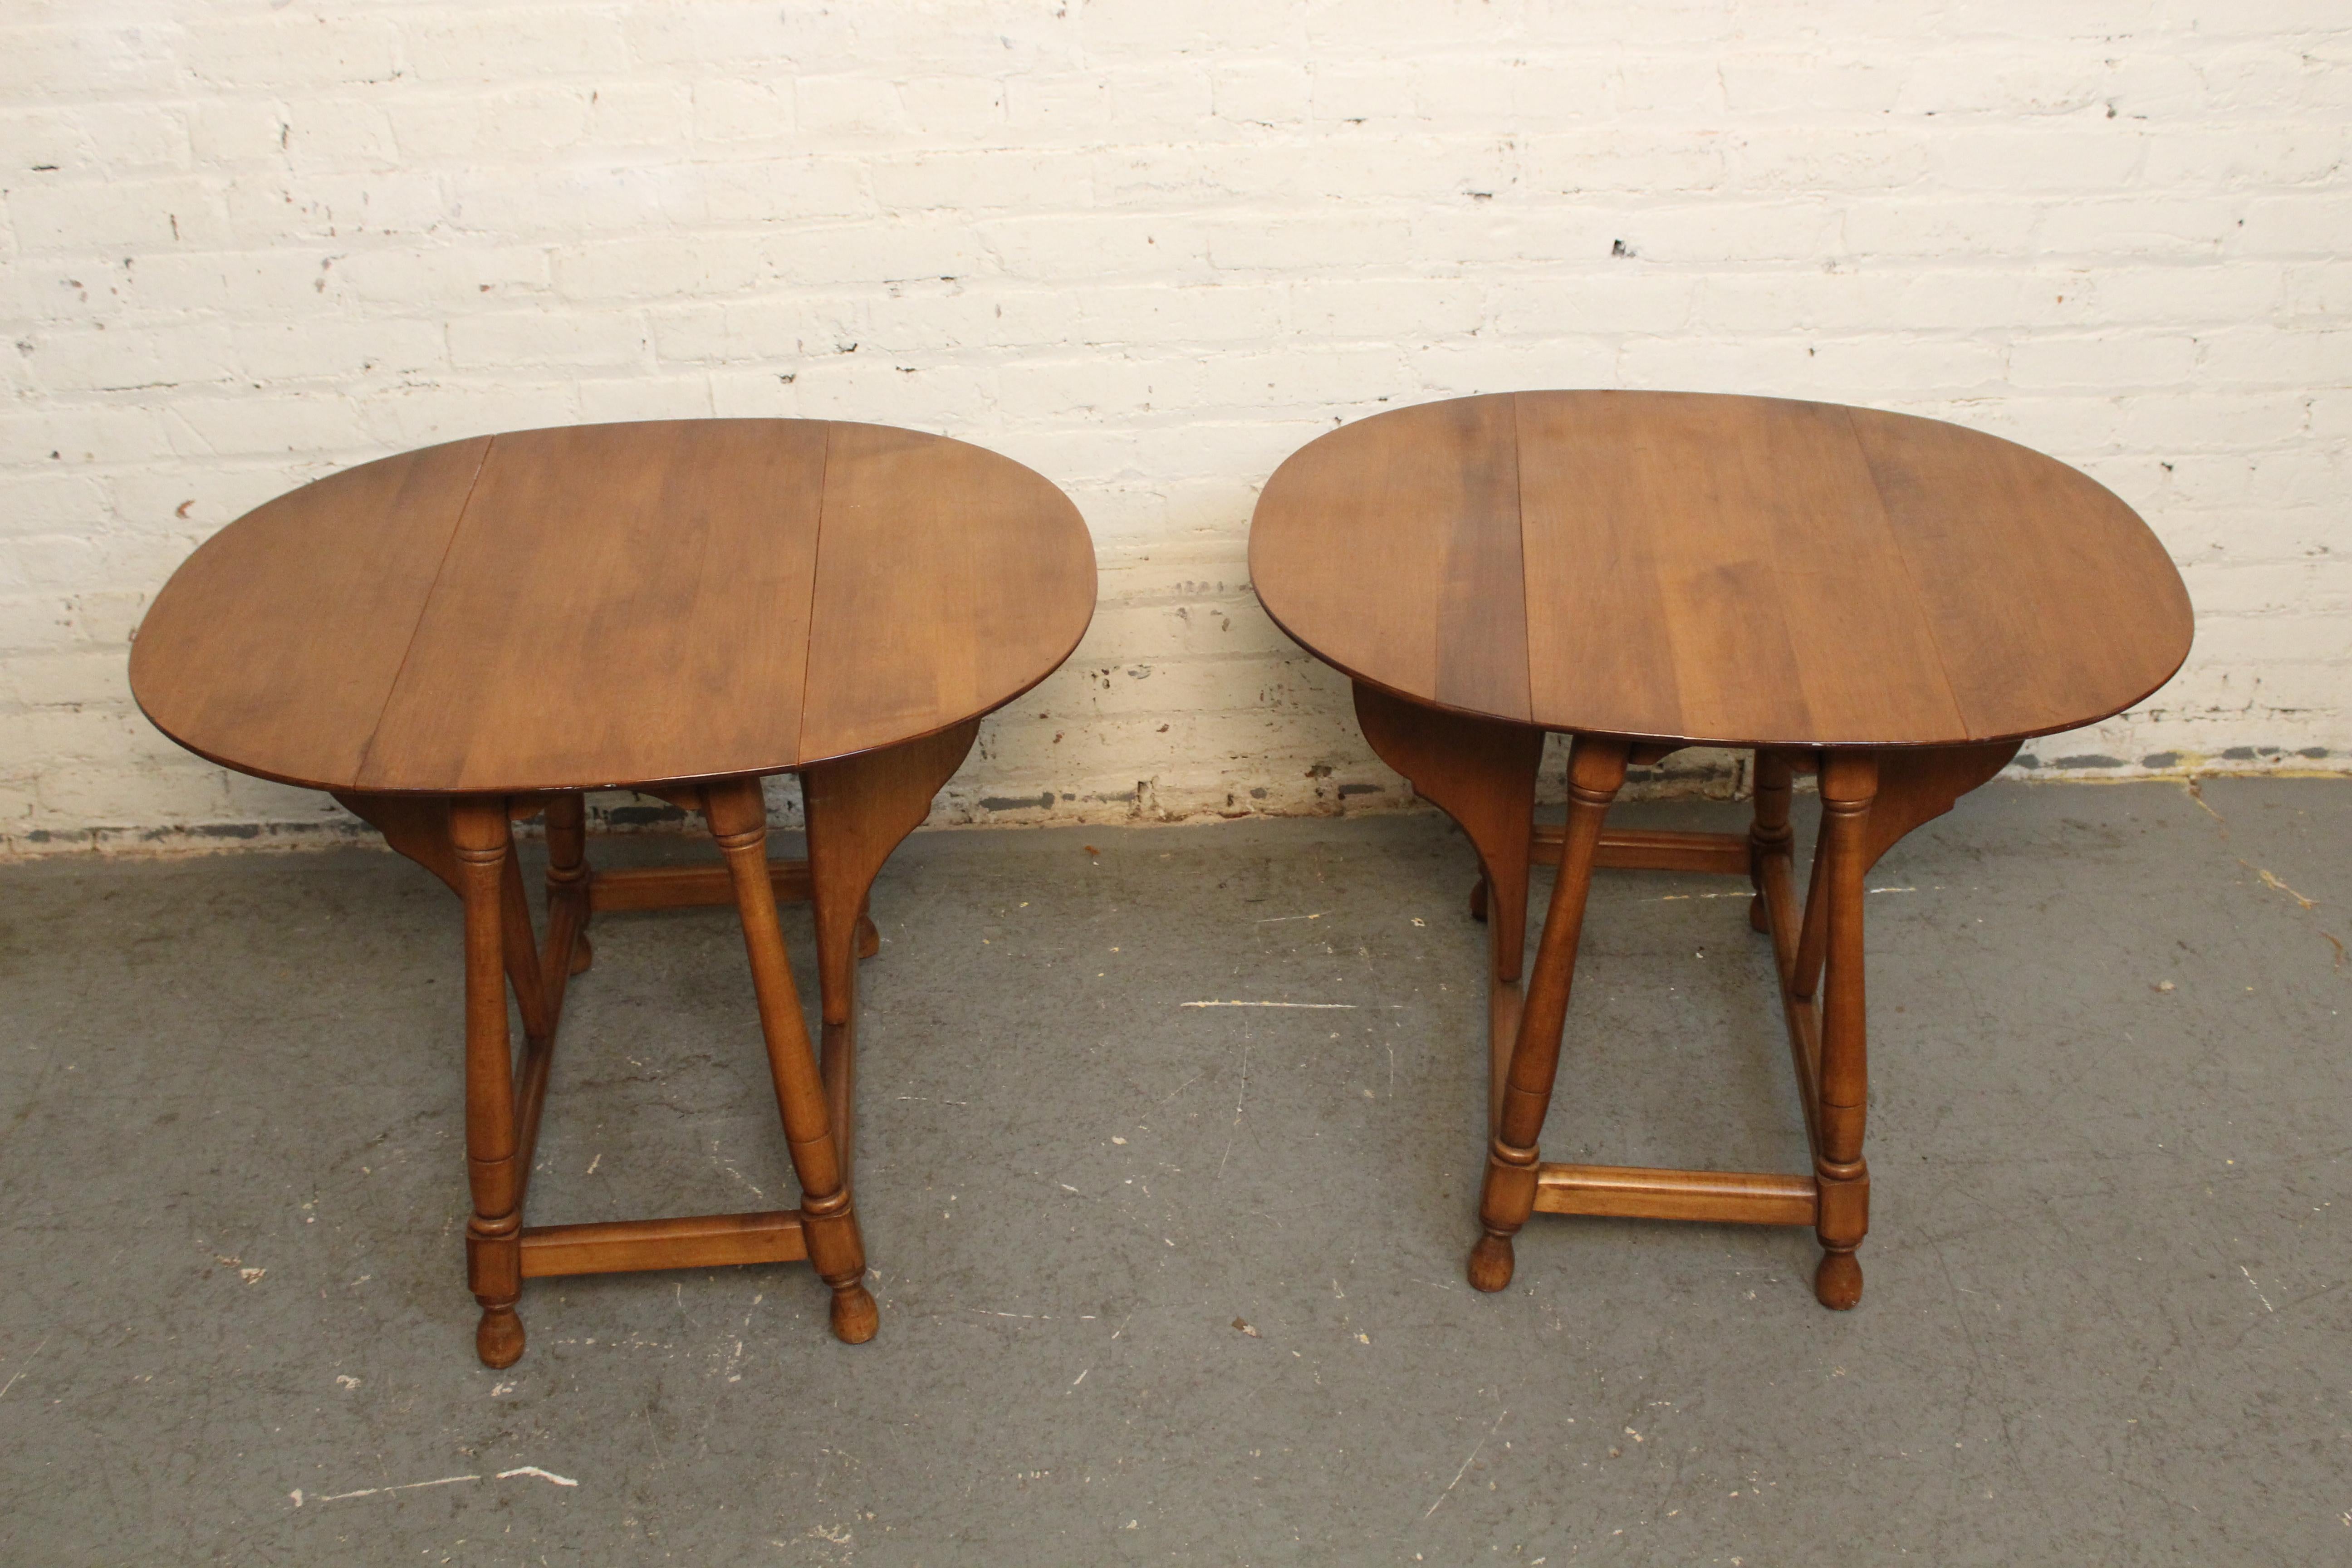 Revitalize the spirit of '76 with these charmingly chic Colonial drop leaf side tables! Constructed of solid American maple with turned legs and carved butterfly hinges, each table opens from a compact 14x26